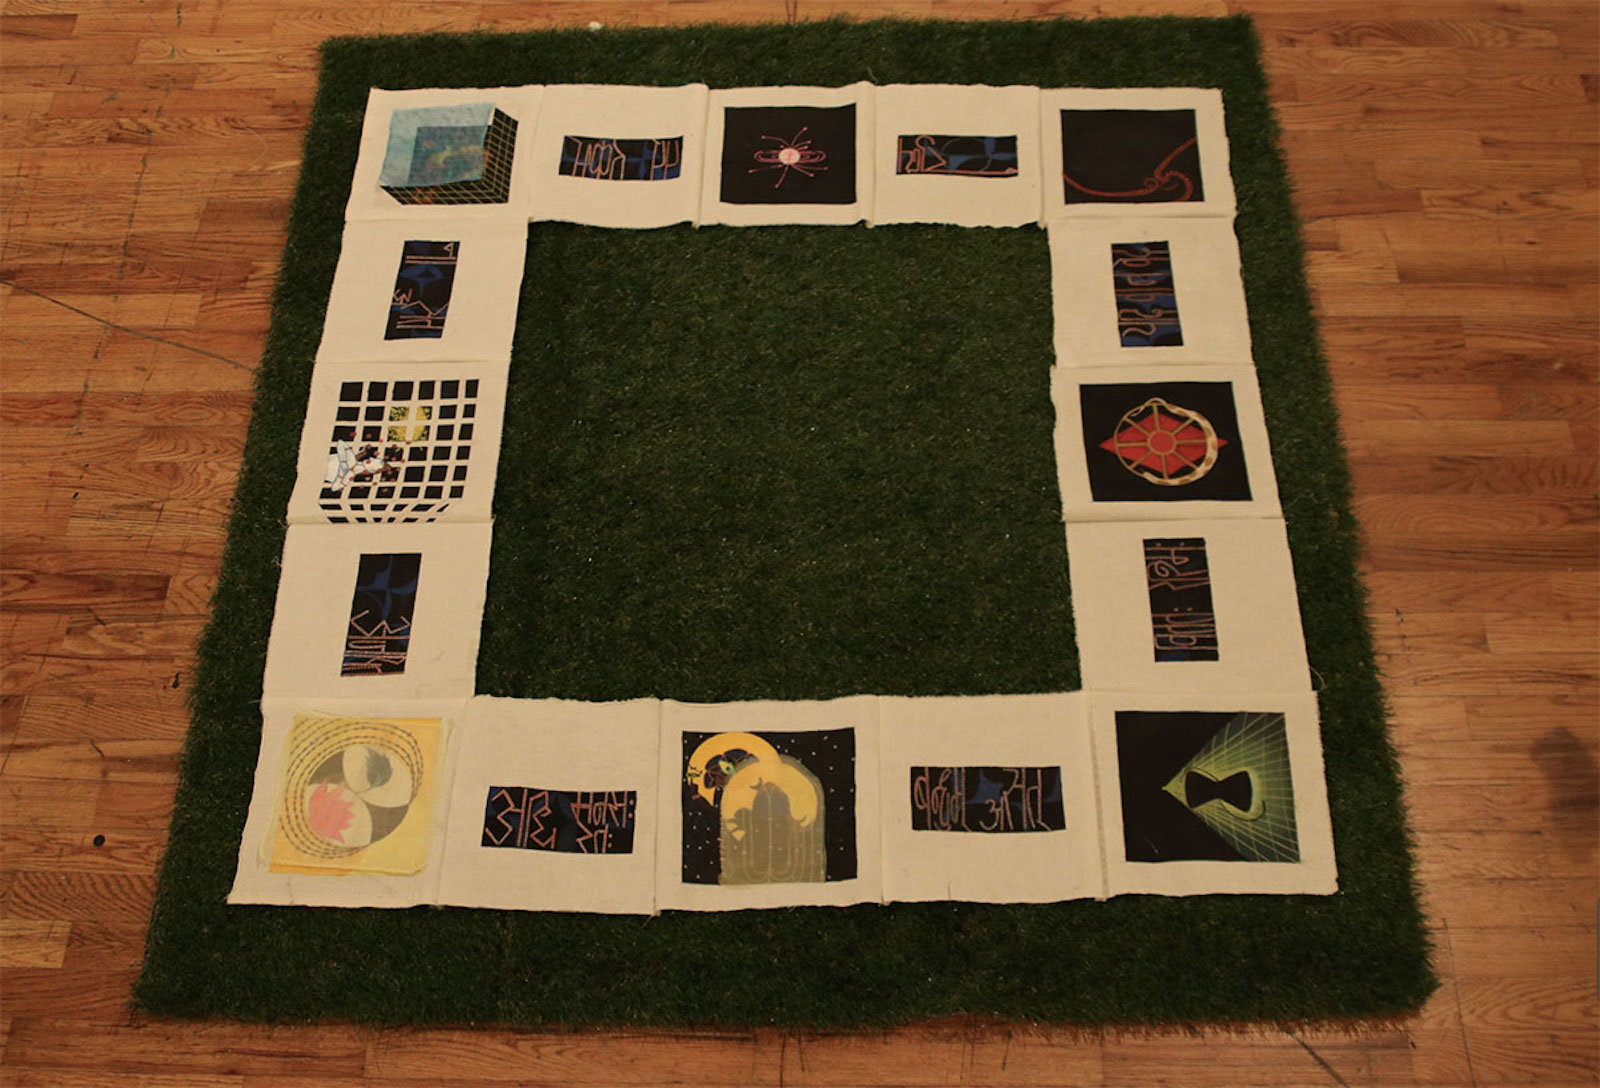 Art on square formats arranged as a border along a patch of green turf.